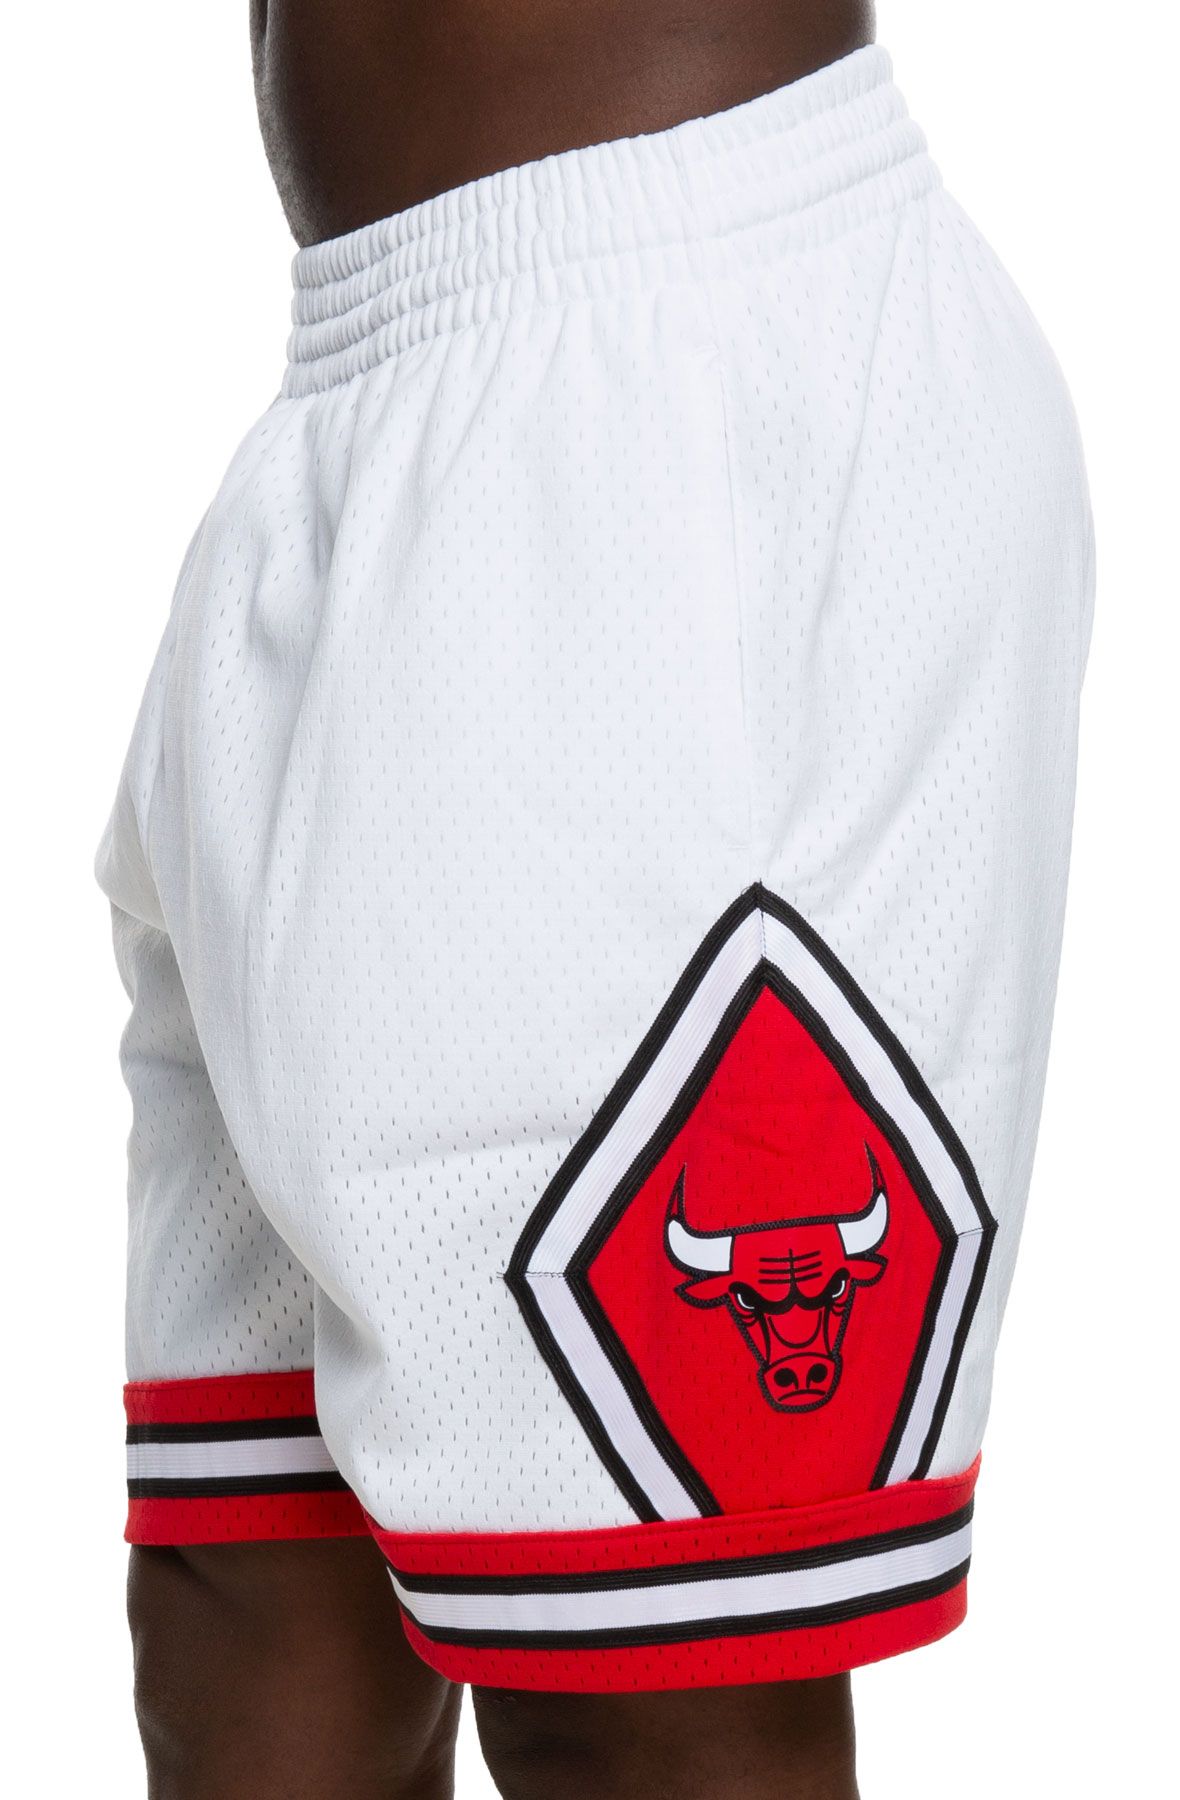 Men's After School Special White Chicago Bulls Shorts